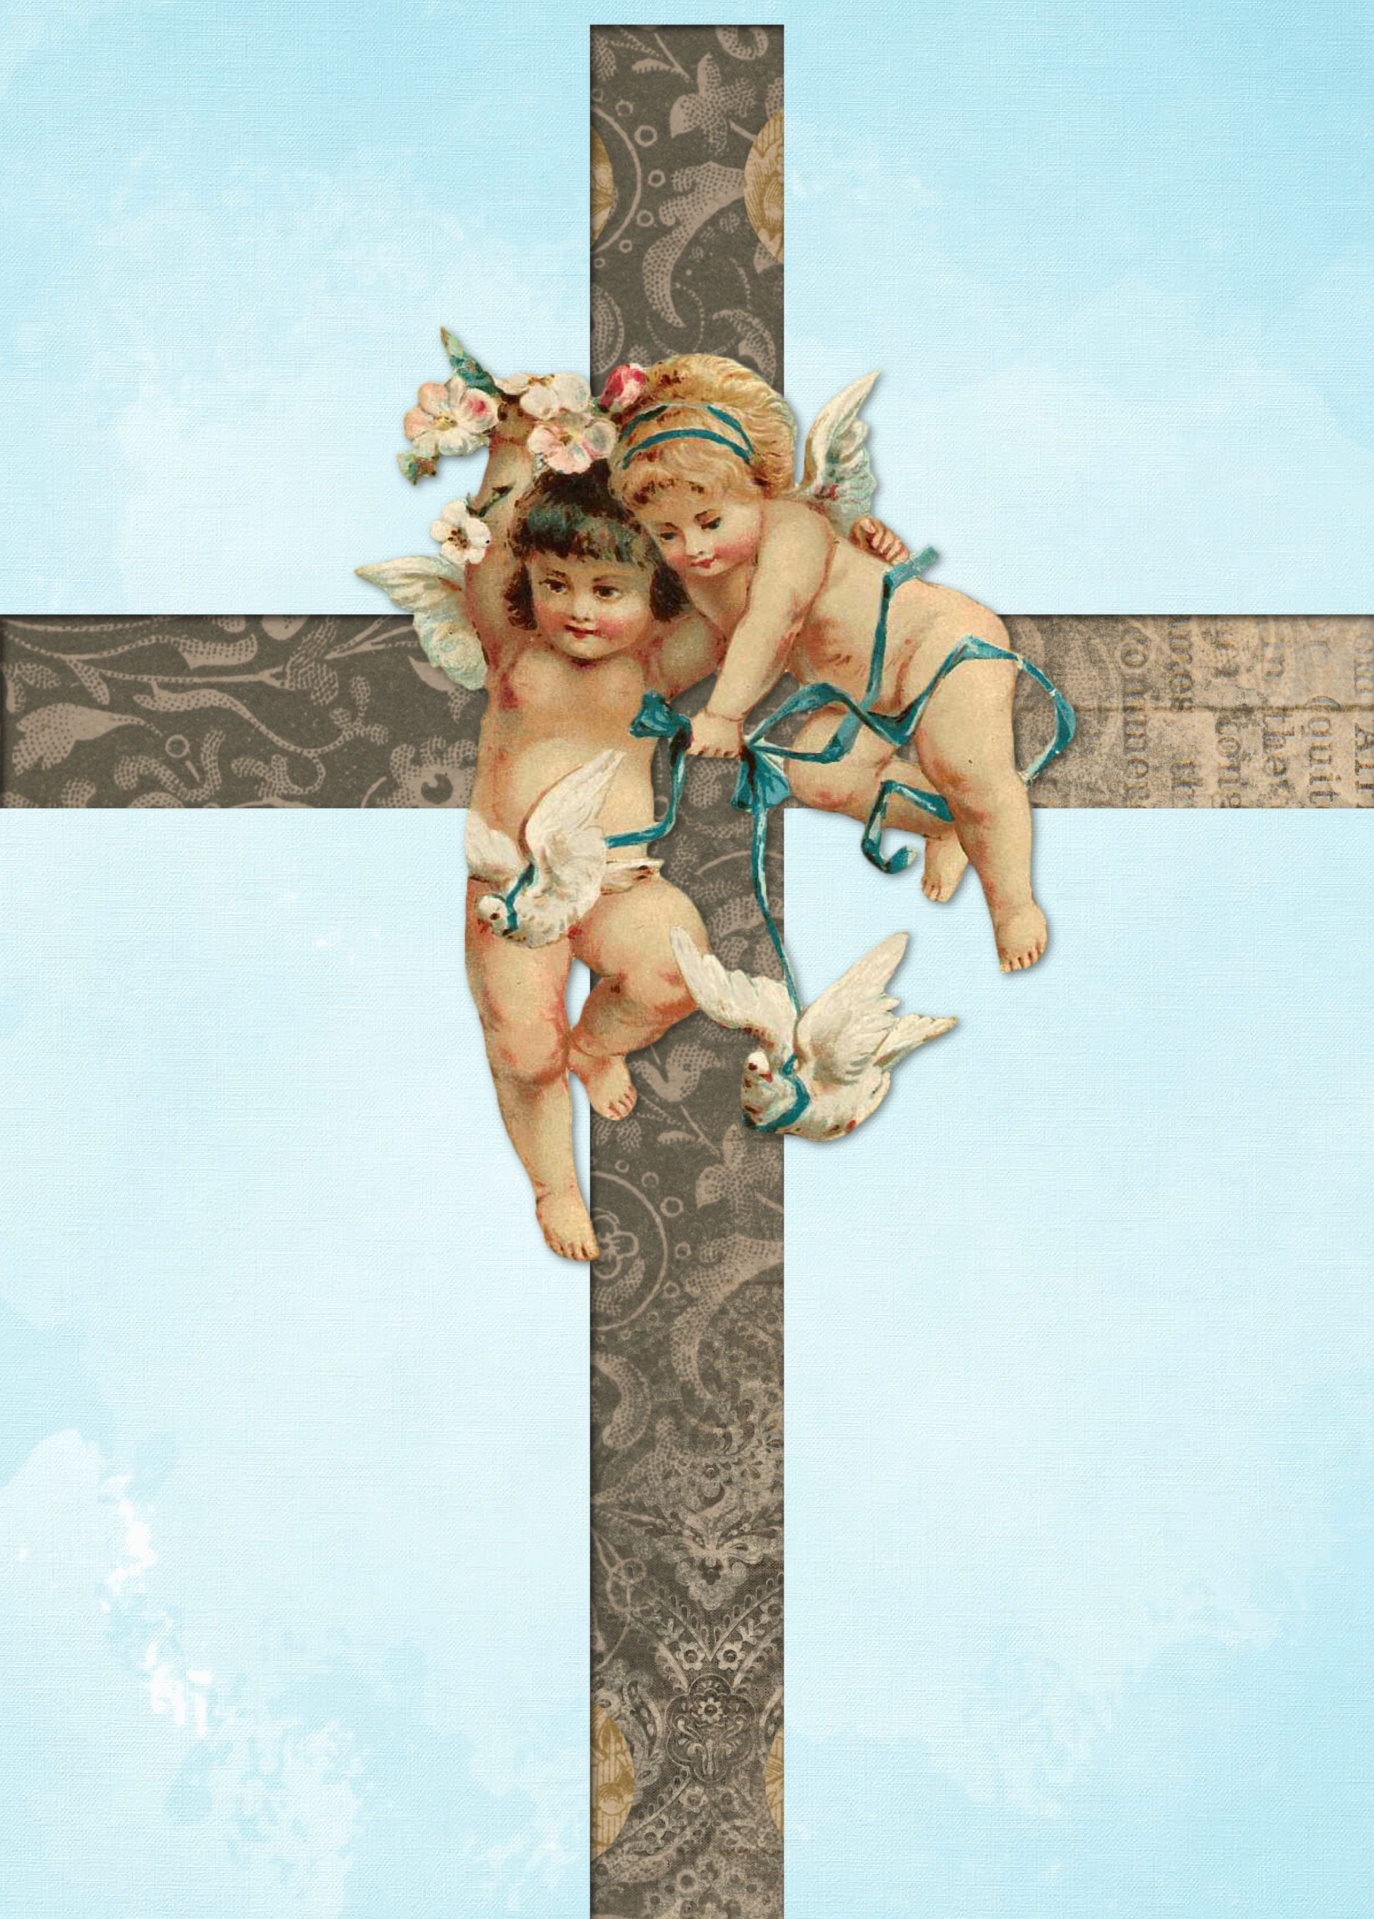 vintage illustration of two little children angels on a cross placed on a blue sky with wispy clouds